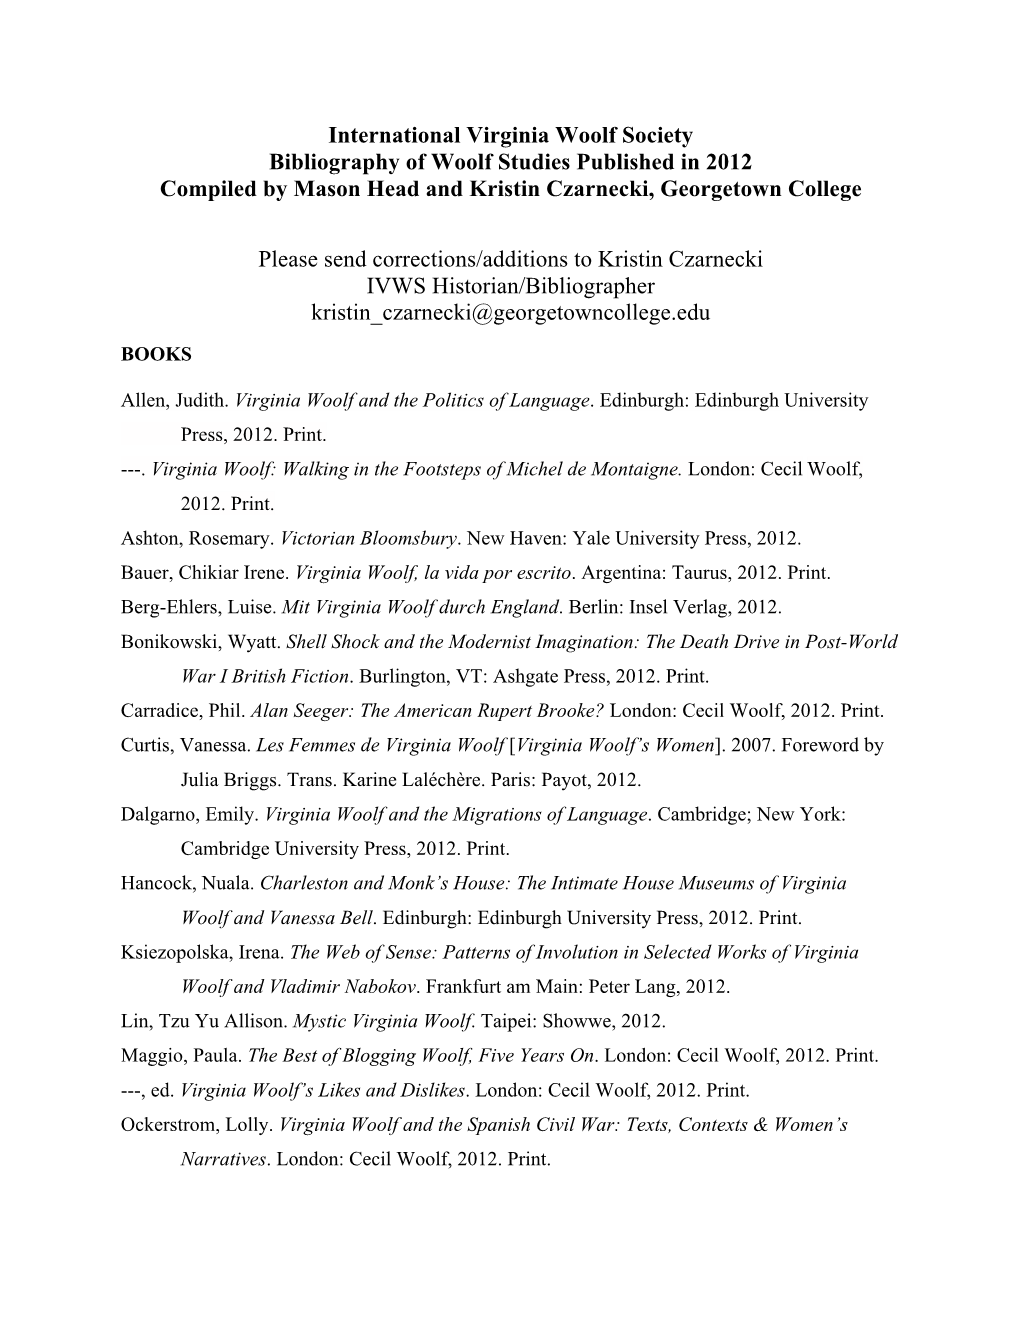 International Virginia Woolf Society Bibliography of Woolf Studies Published in 2012 Compiled by Mason Head and Kristin Czarnecki, Georgetown College